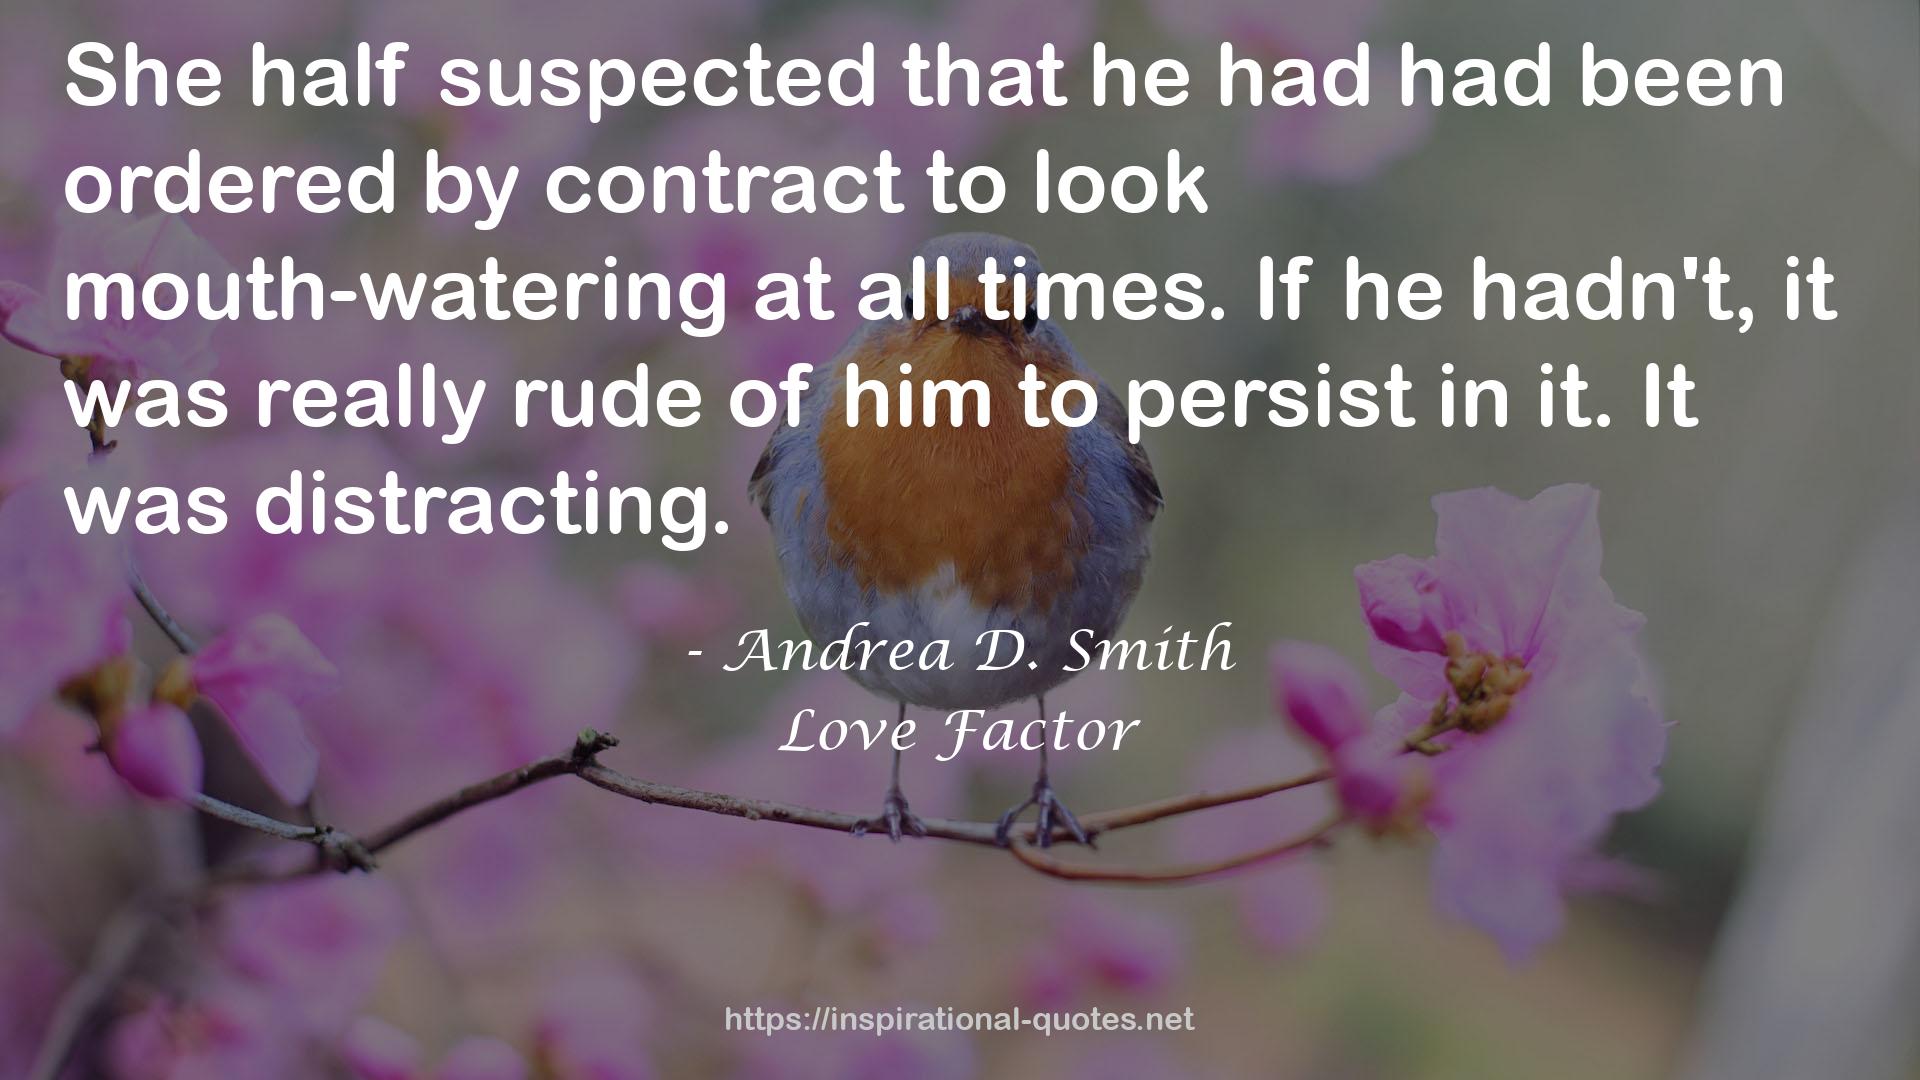 Andrea D. Smith QUOTES